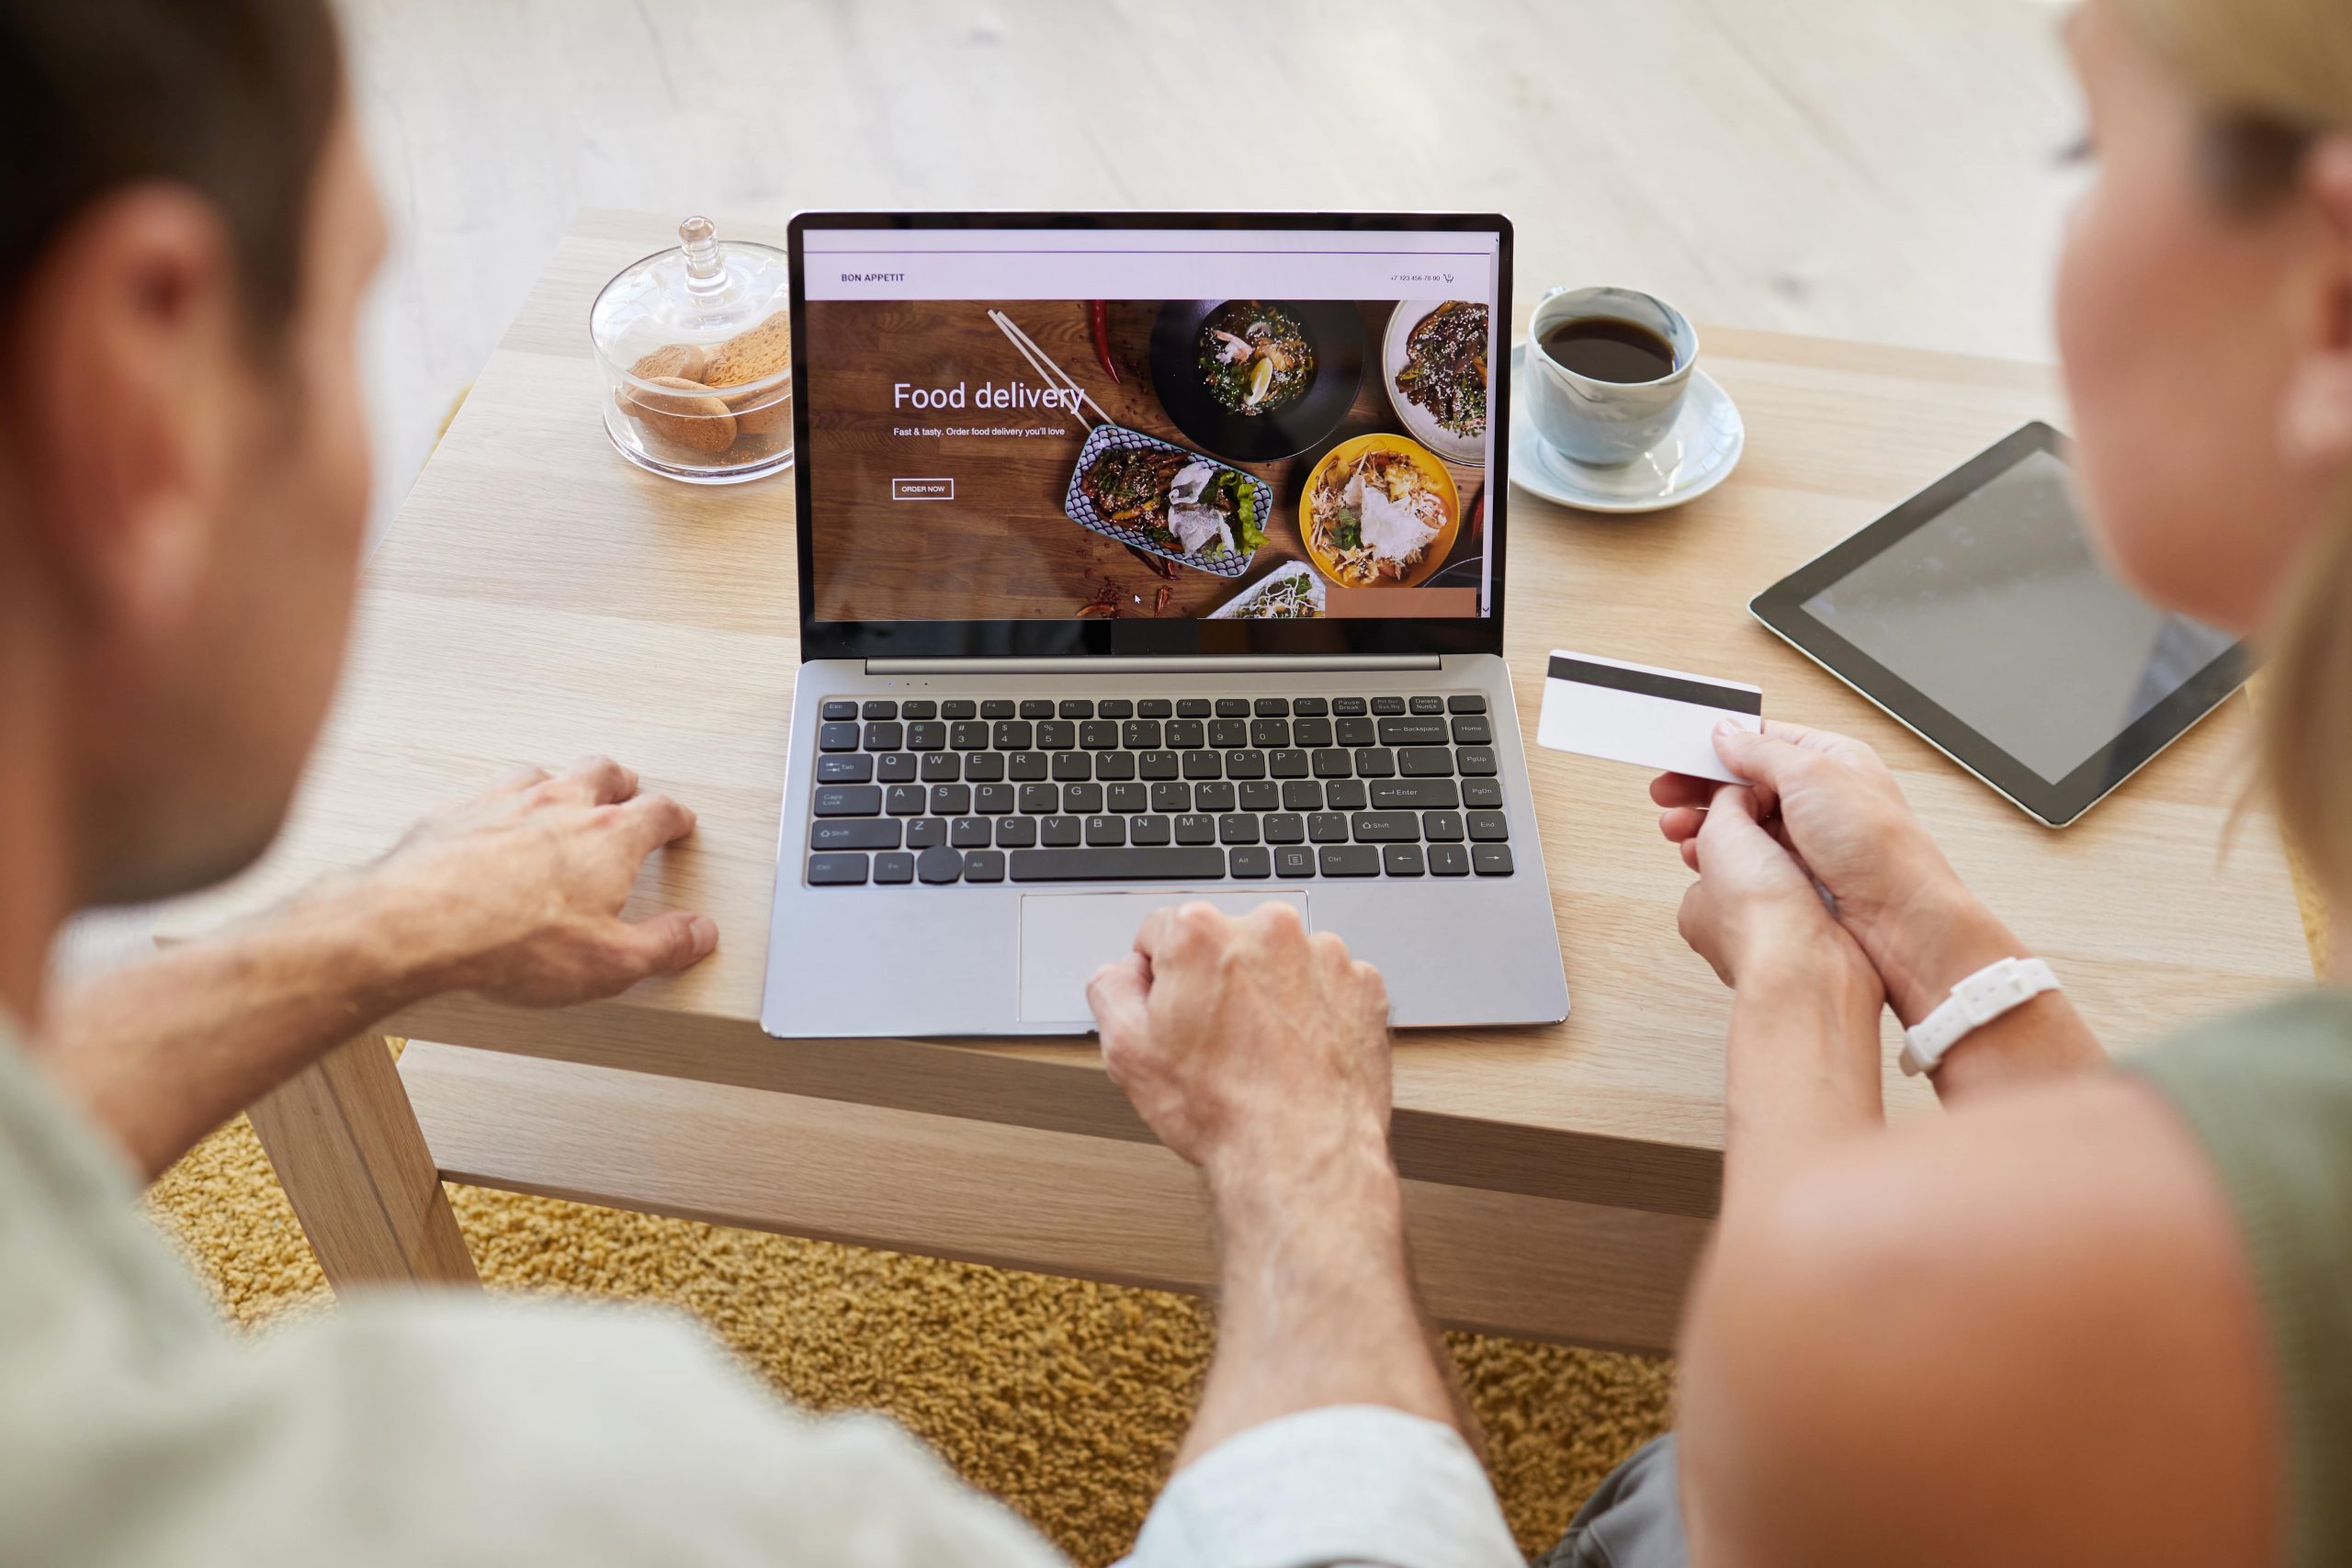 Why Business Website Matters for Restaurant Businesses